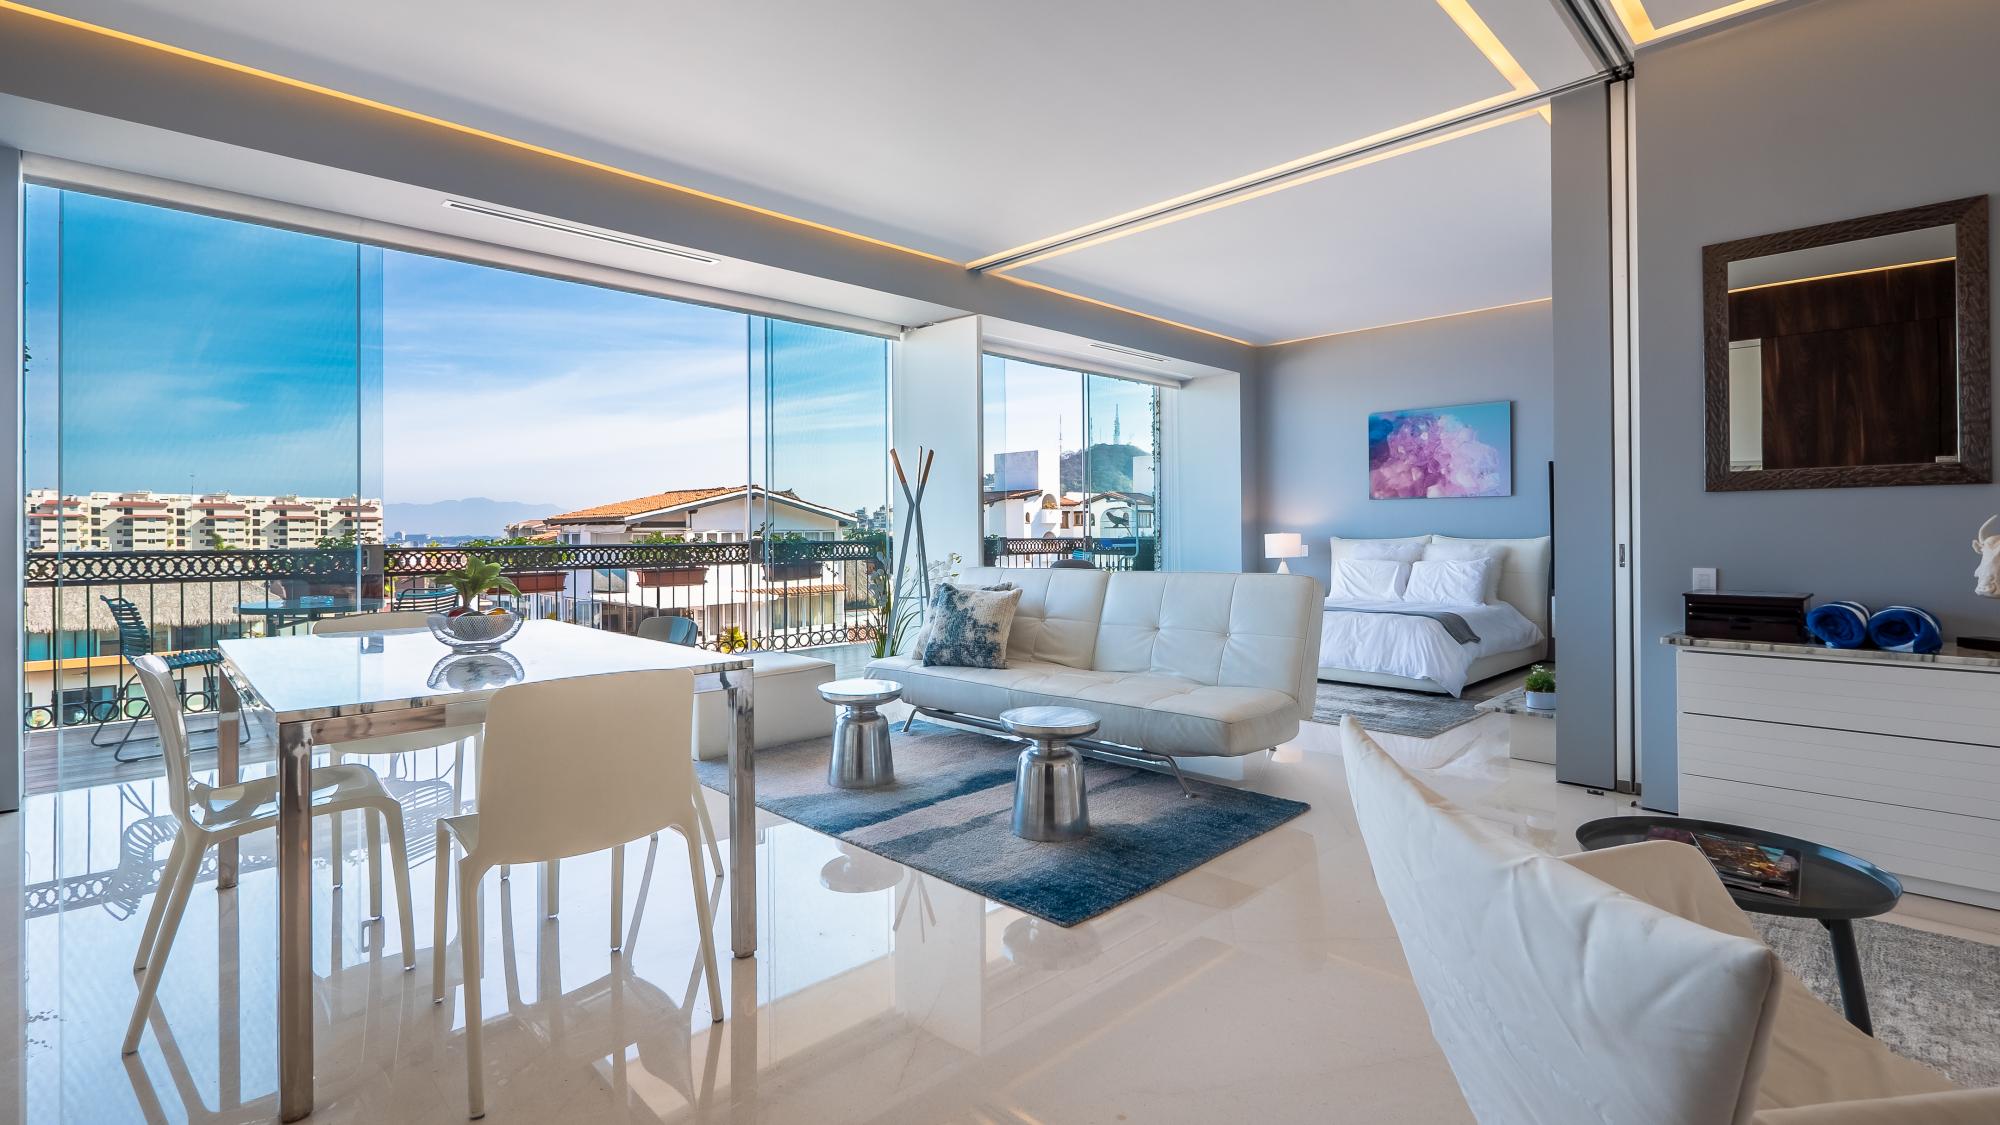 Property Image 1 - Fresh Relaxing Flat with Stunning Views of Banderas Bay